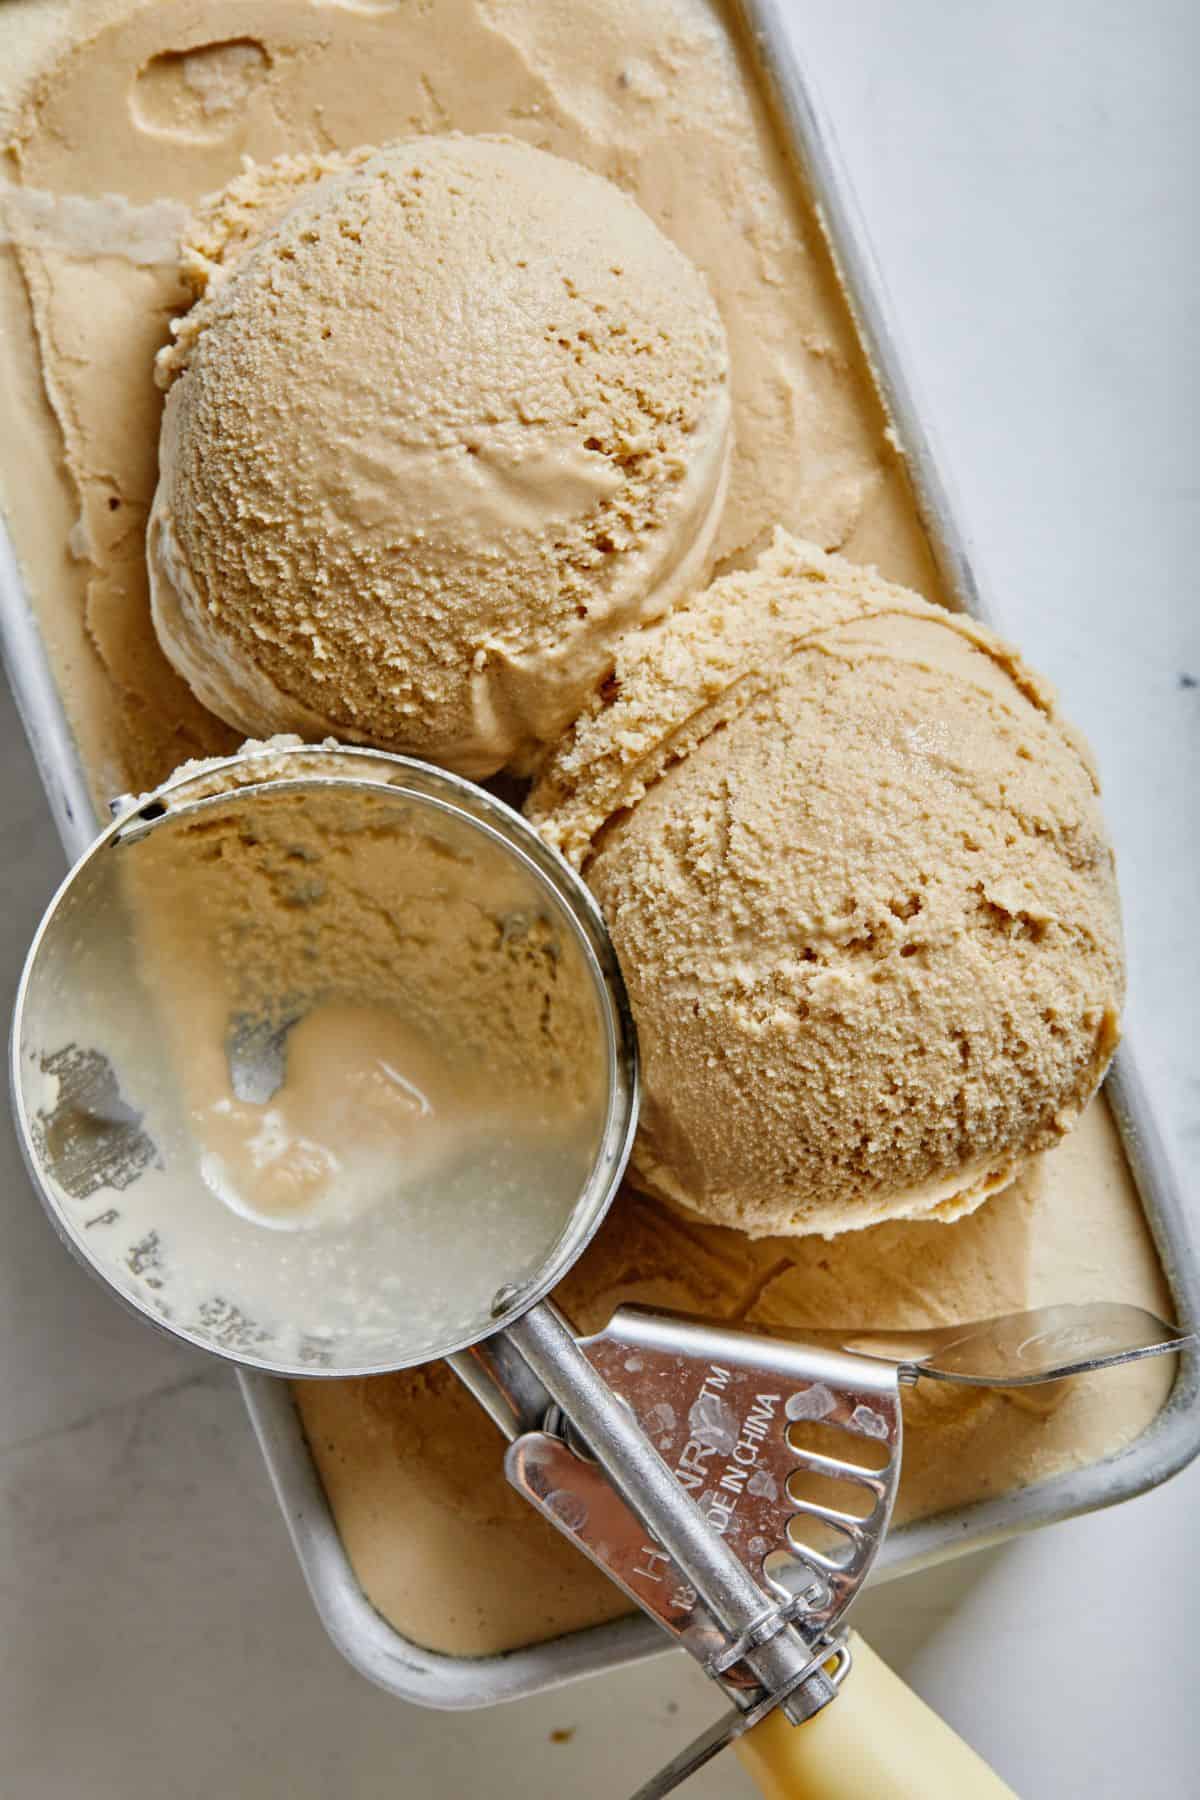 Two scoops of coffee ice cream resting on top of an ice cream tub with an ice cream scoop beside it